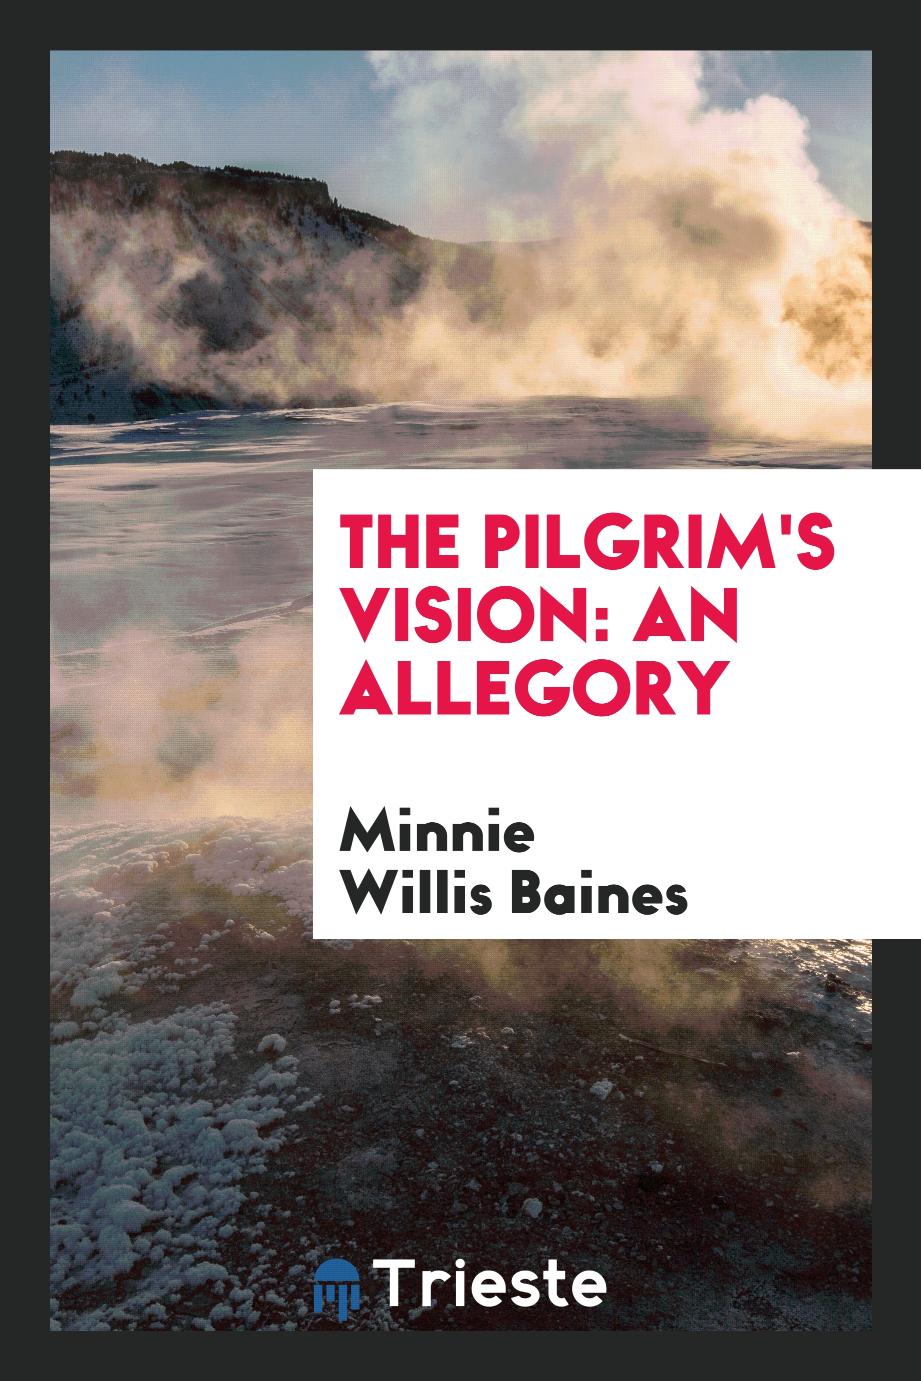 The Pilgrim's Vision: An Allegory